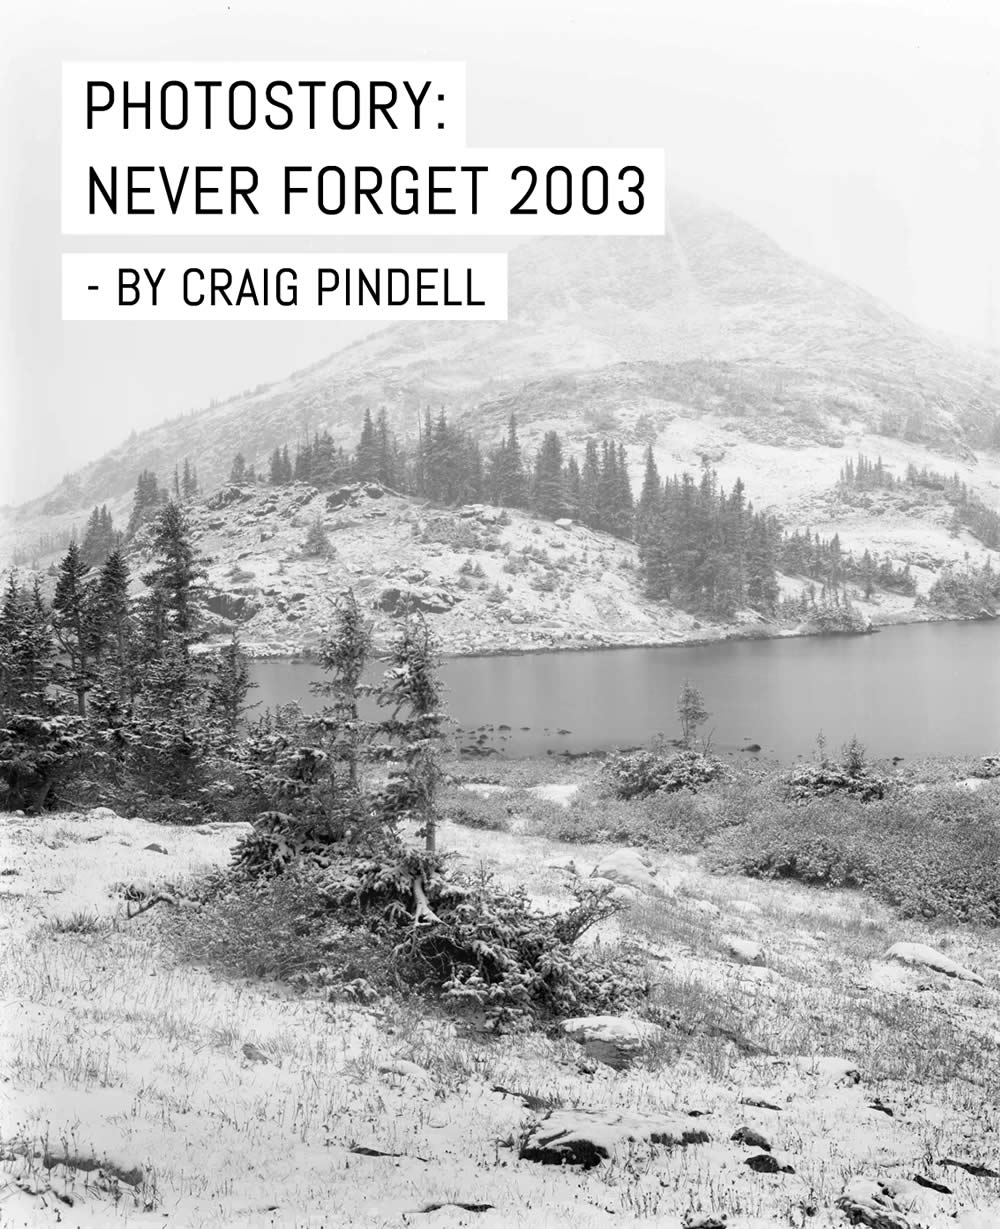 Photostory: Never Forget 2003 – by Craig Pindell